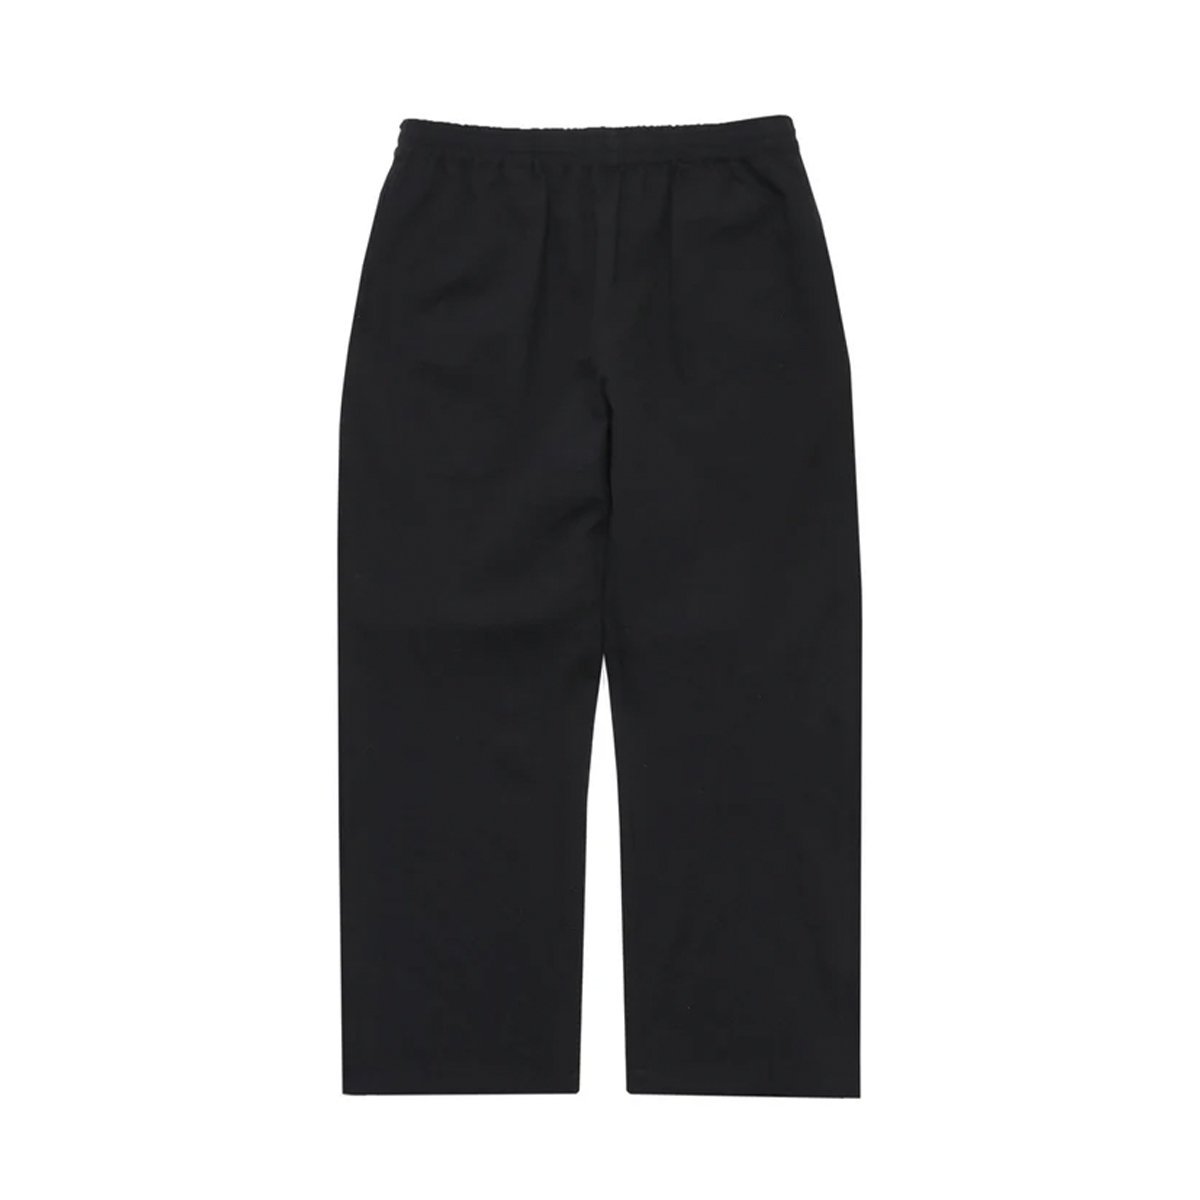 <img class='new_mark_img1' src='https://img.shop-pro.jp/img/new/icons8.gif' style='border:none;display:inline;margin:0px;padding:0px;width:auto;' />WhimsySeersucker Beach Pants (Black)
                          </a>
            <span class=